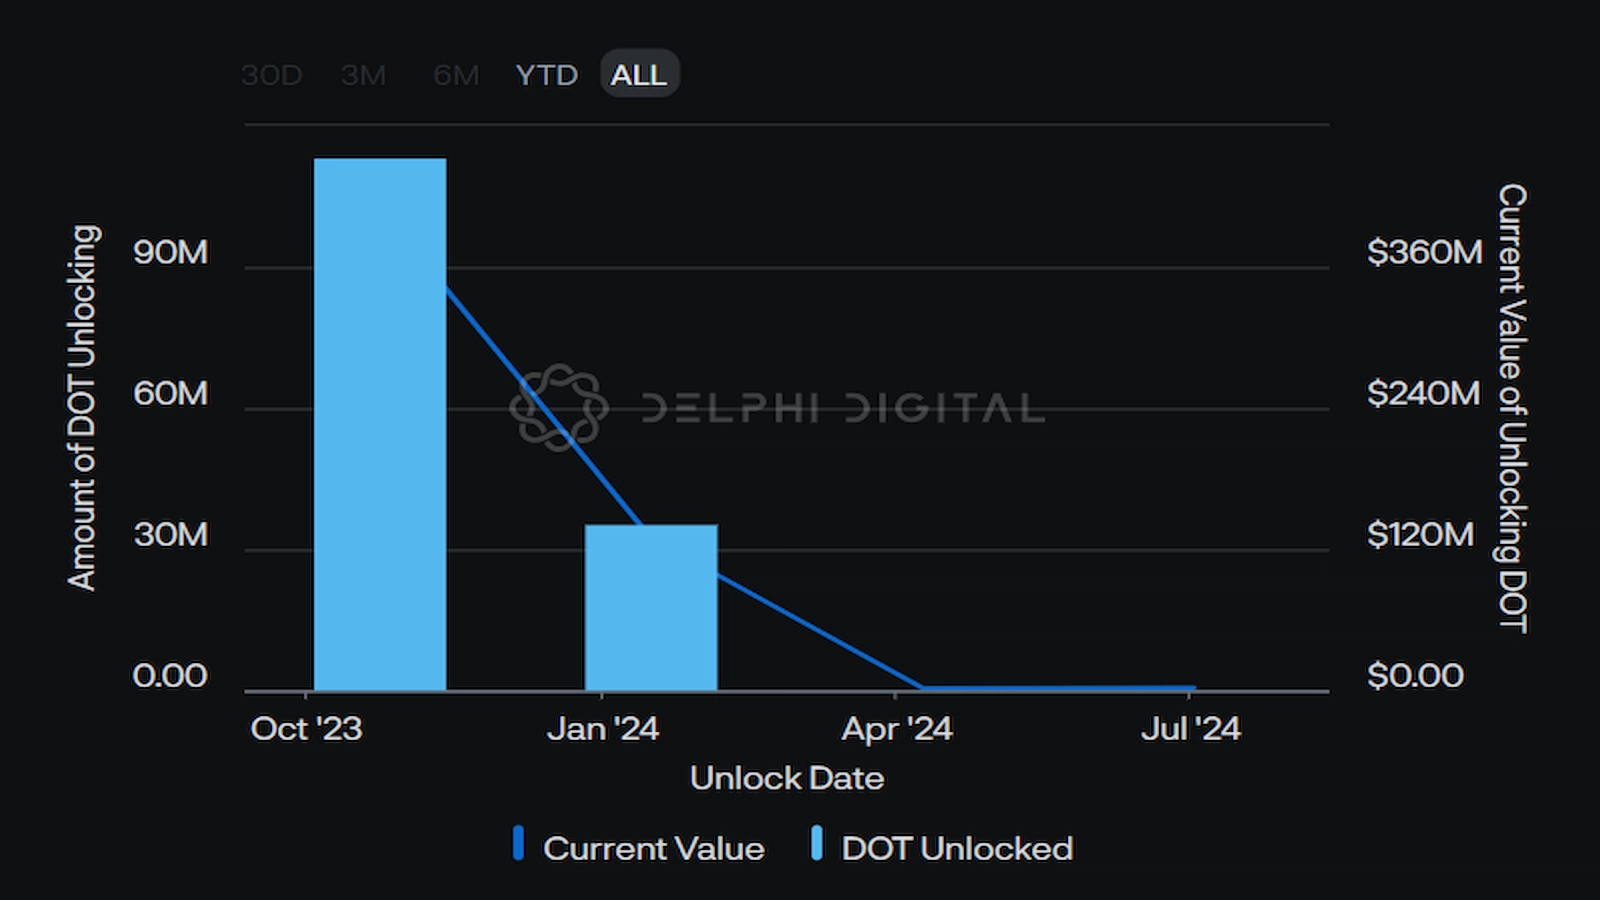 Amount of DOT tokens unlocking vs their current value.